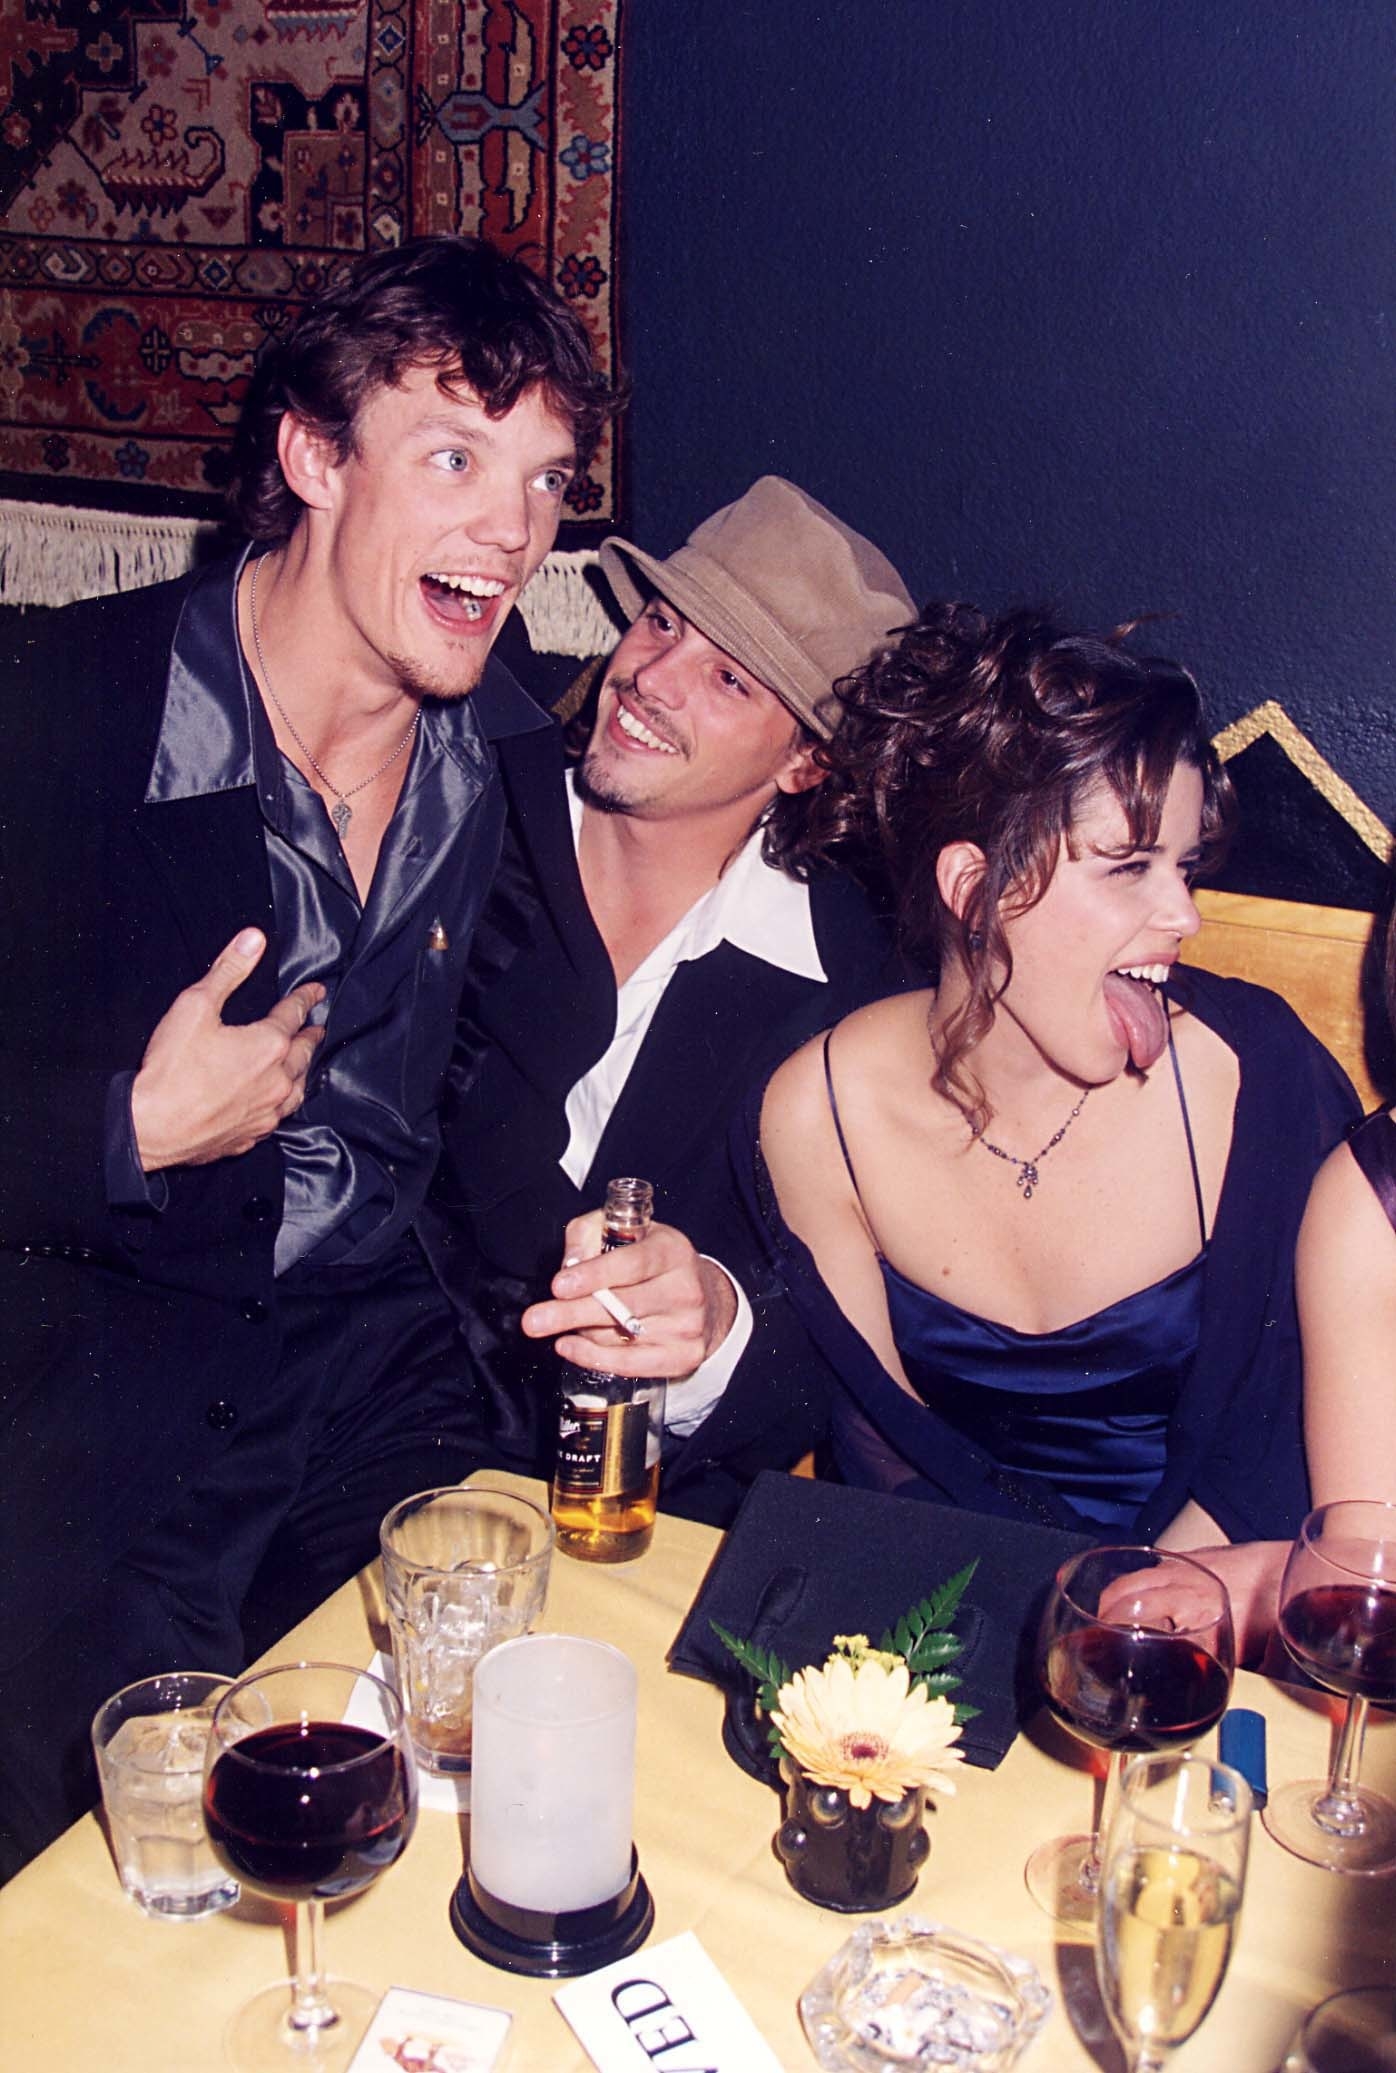 Matthew Lillard, Skeet Ulrich, and Neve Campbell happily sitting at a table with glasses of wine